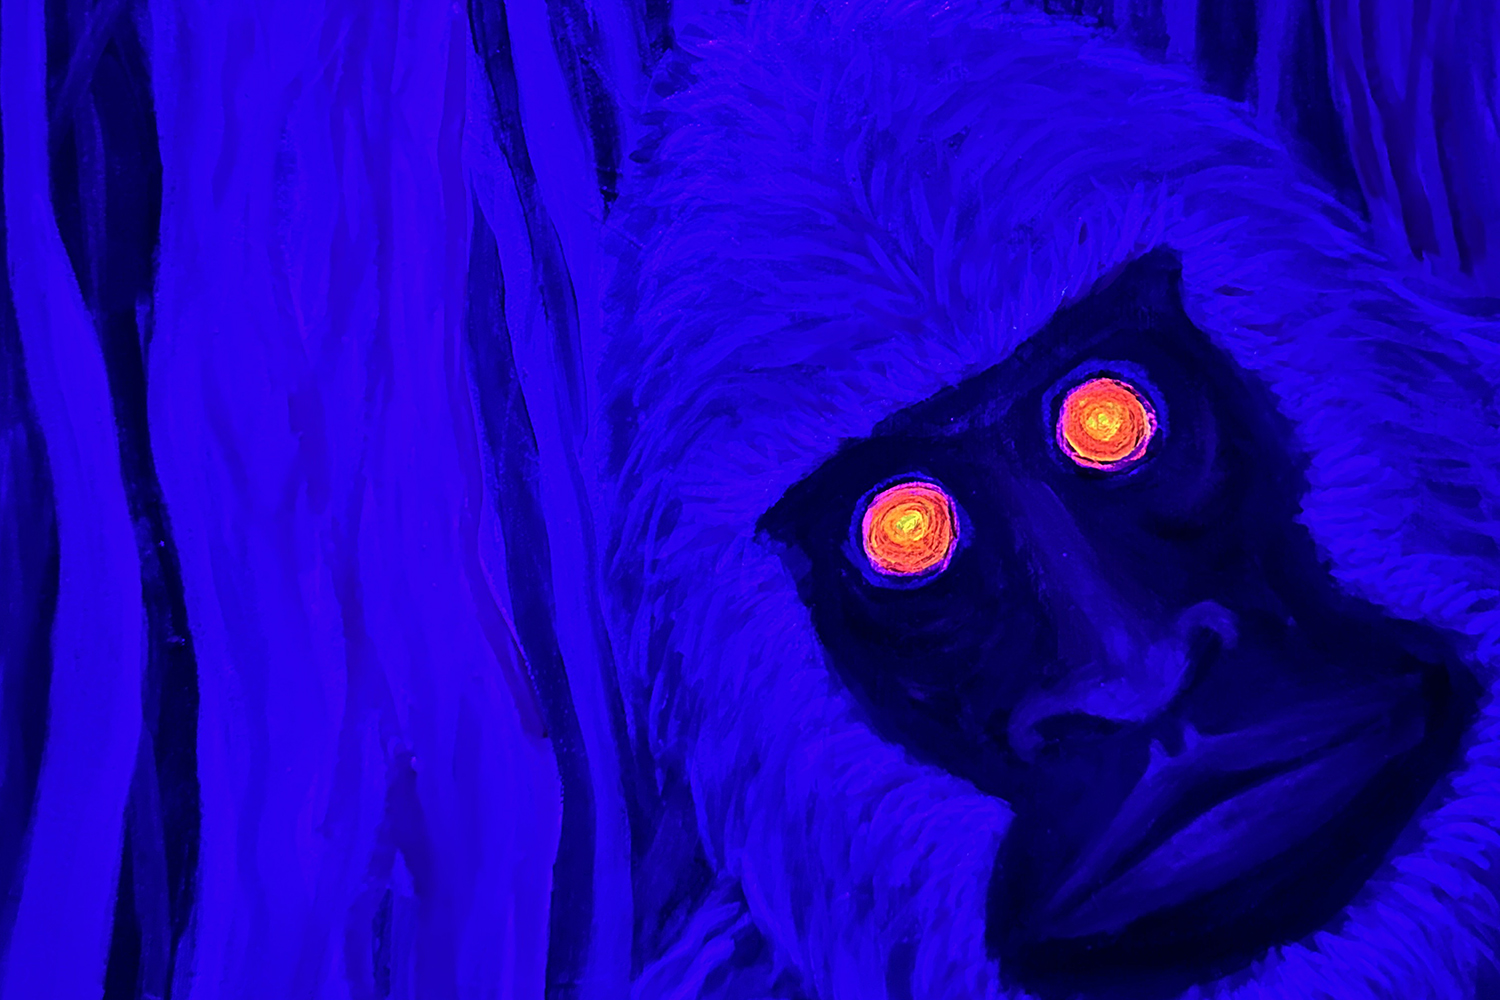 Sasquatch red eyes painting at High Rock Escapes in Hocking Hills